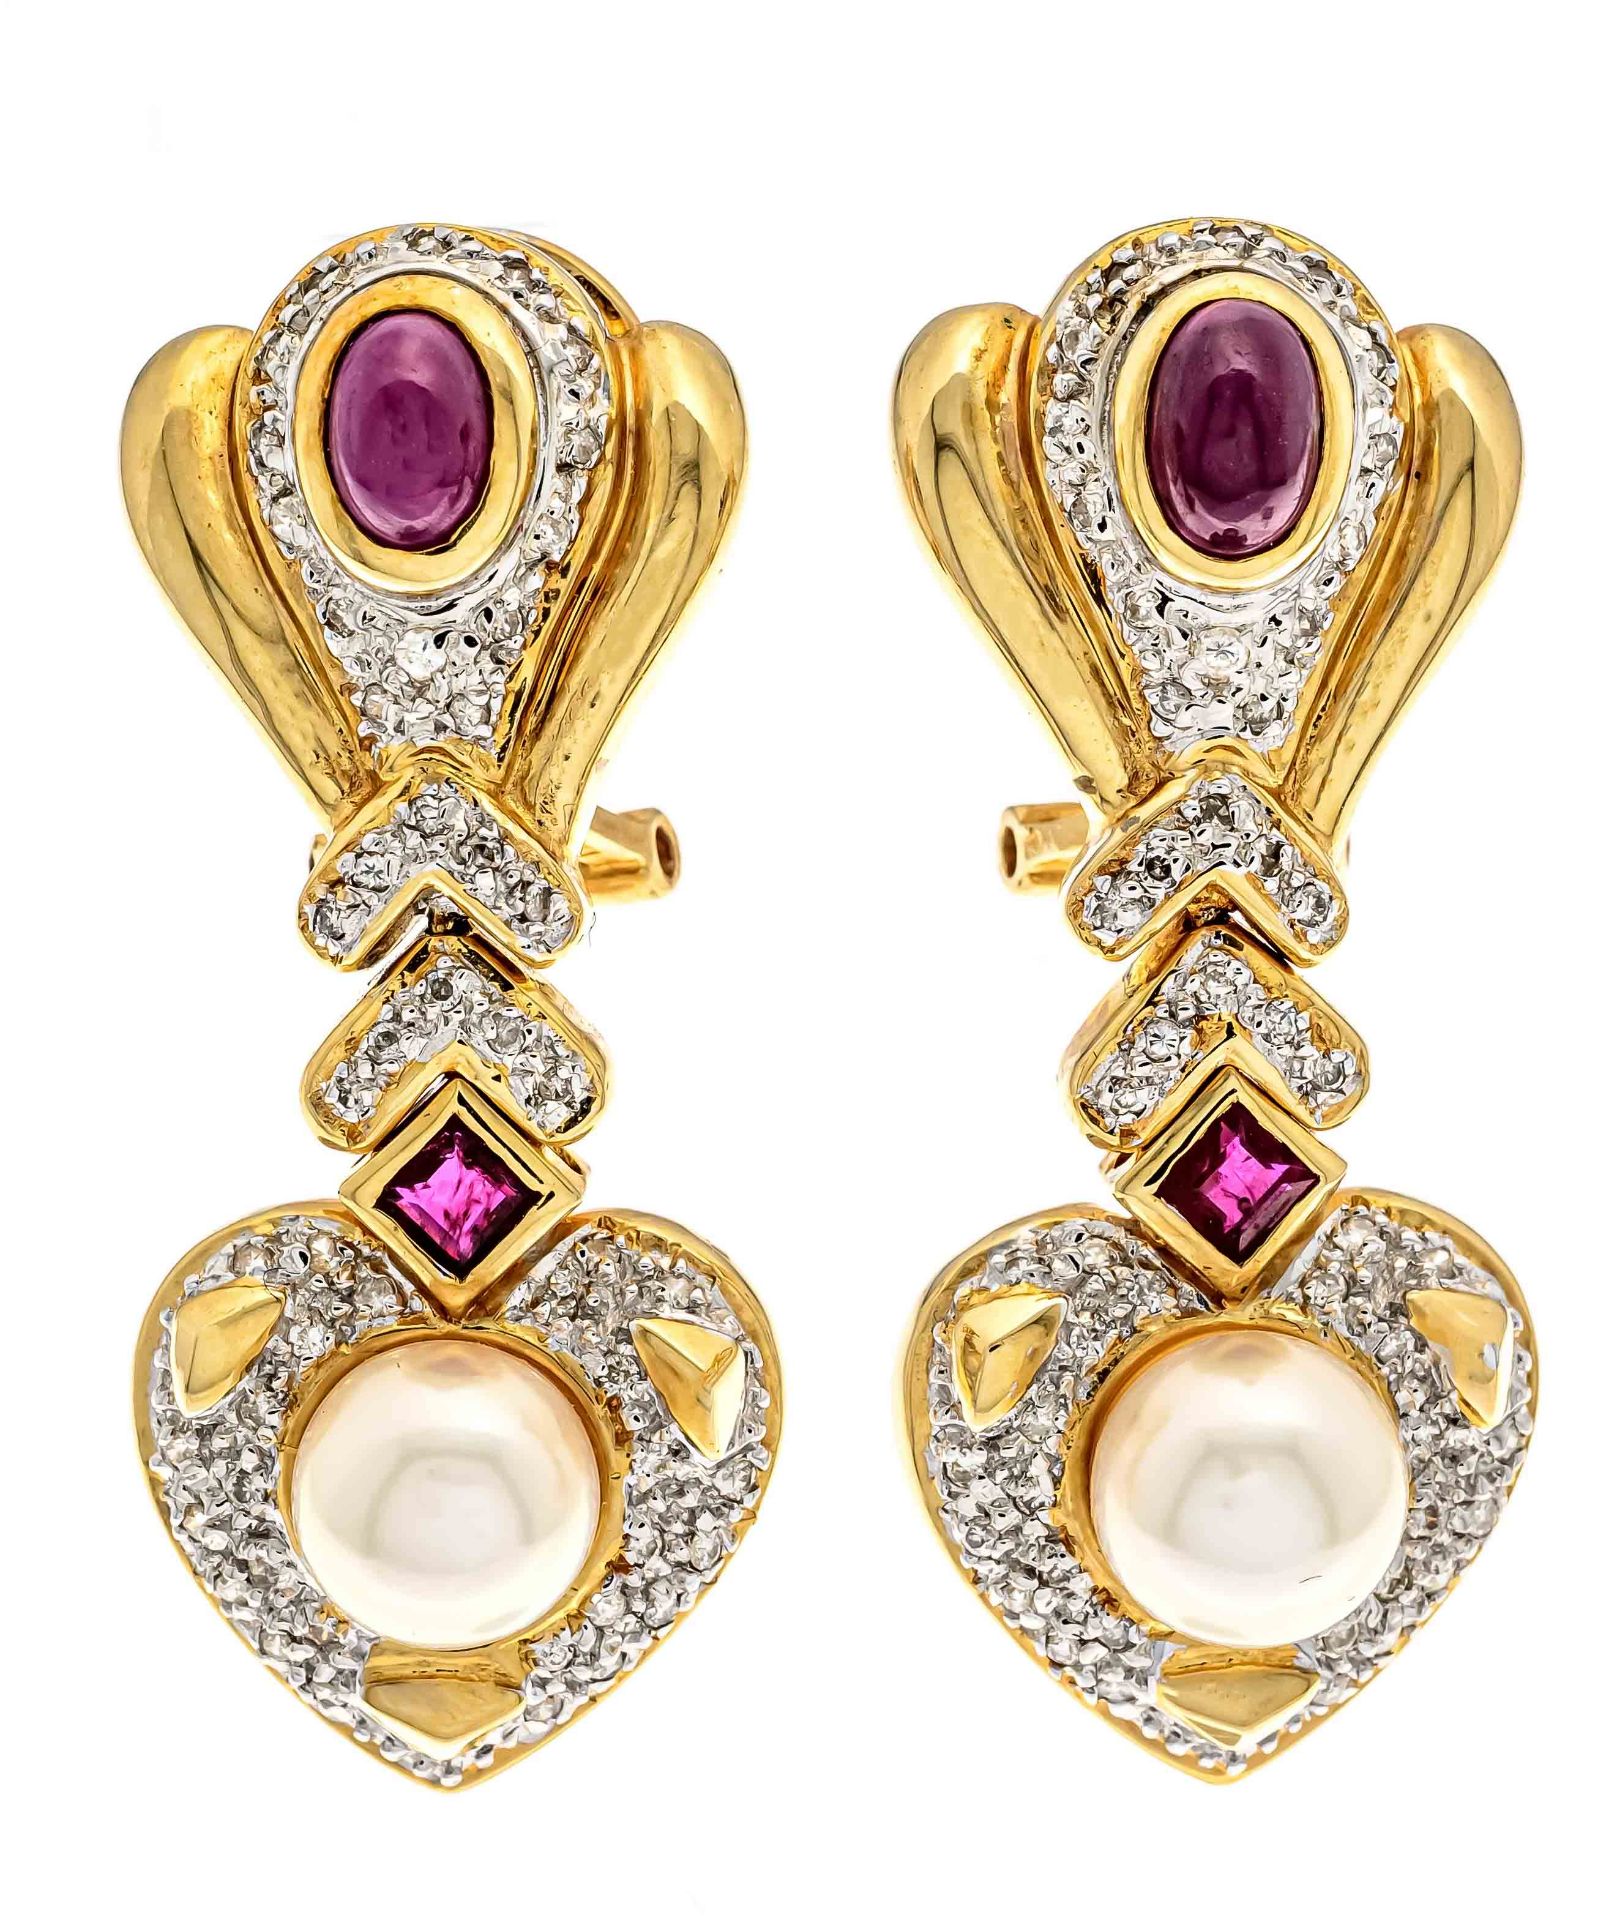 Ruby diamond clip earrings GG/WG 585/000 with 2 oval ruby cabochons 5,9 x 3,6 mm, 2 carré faceted